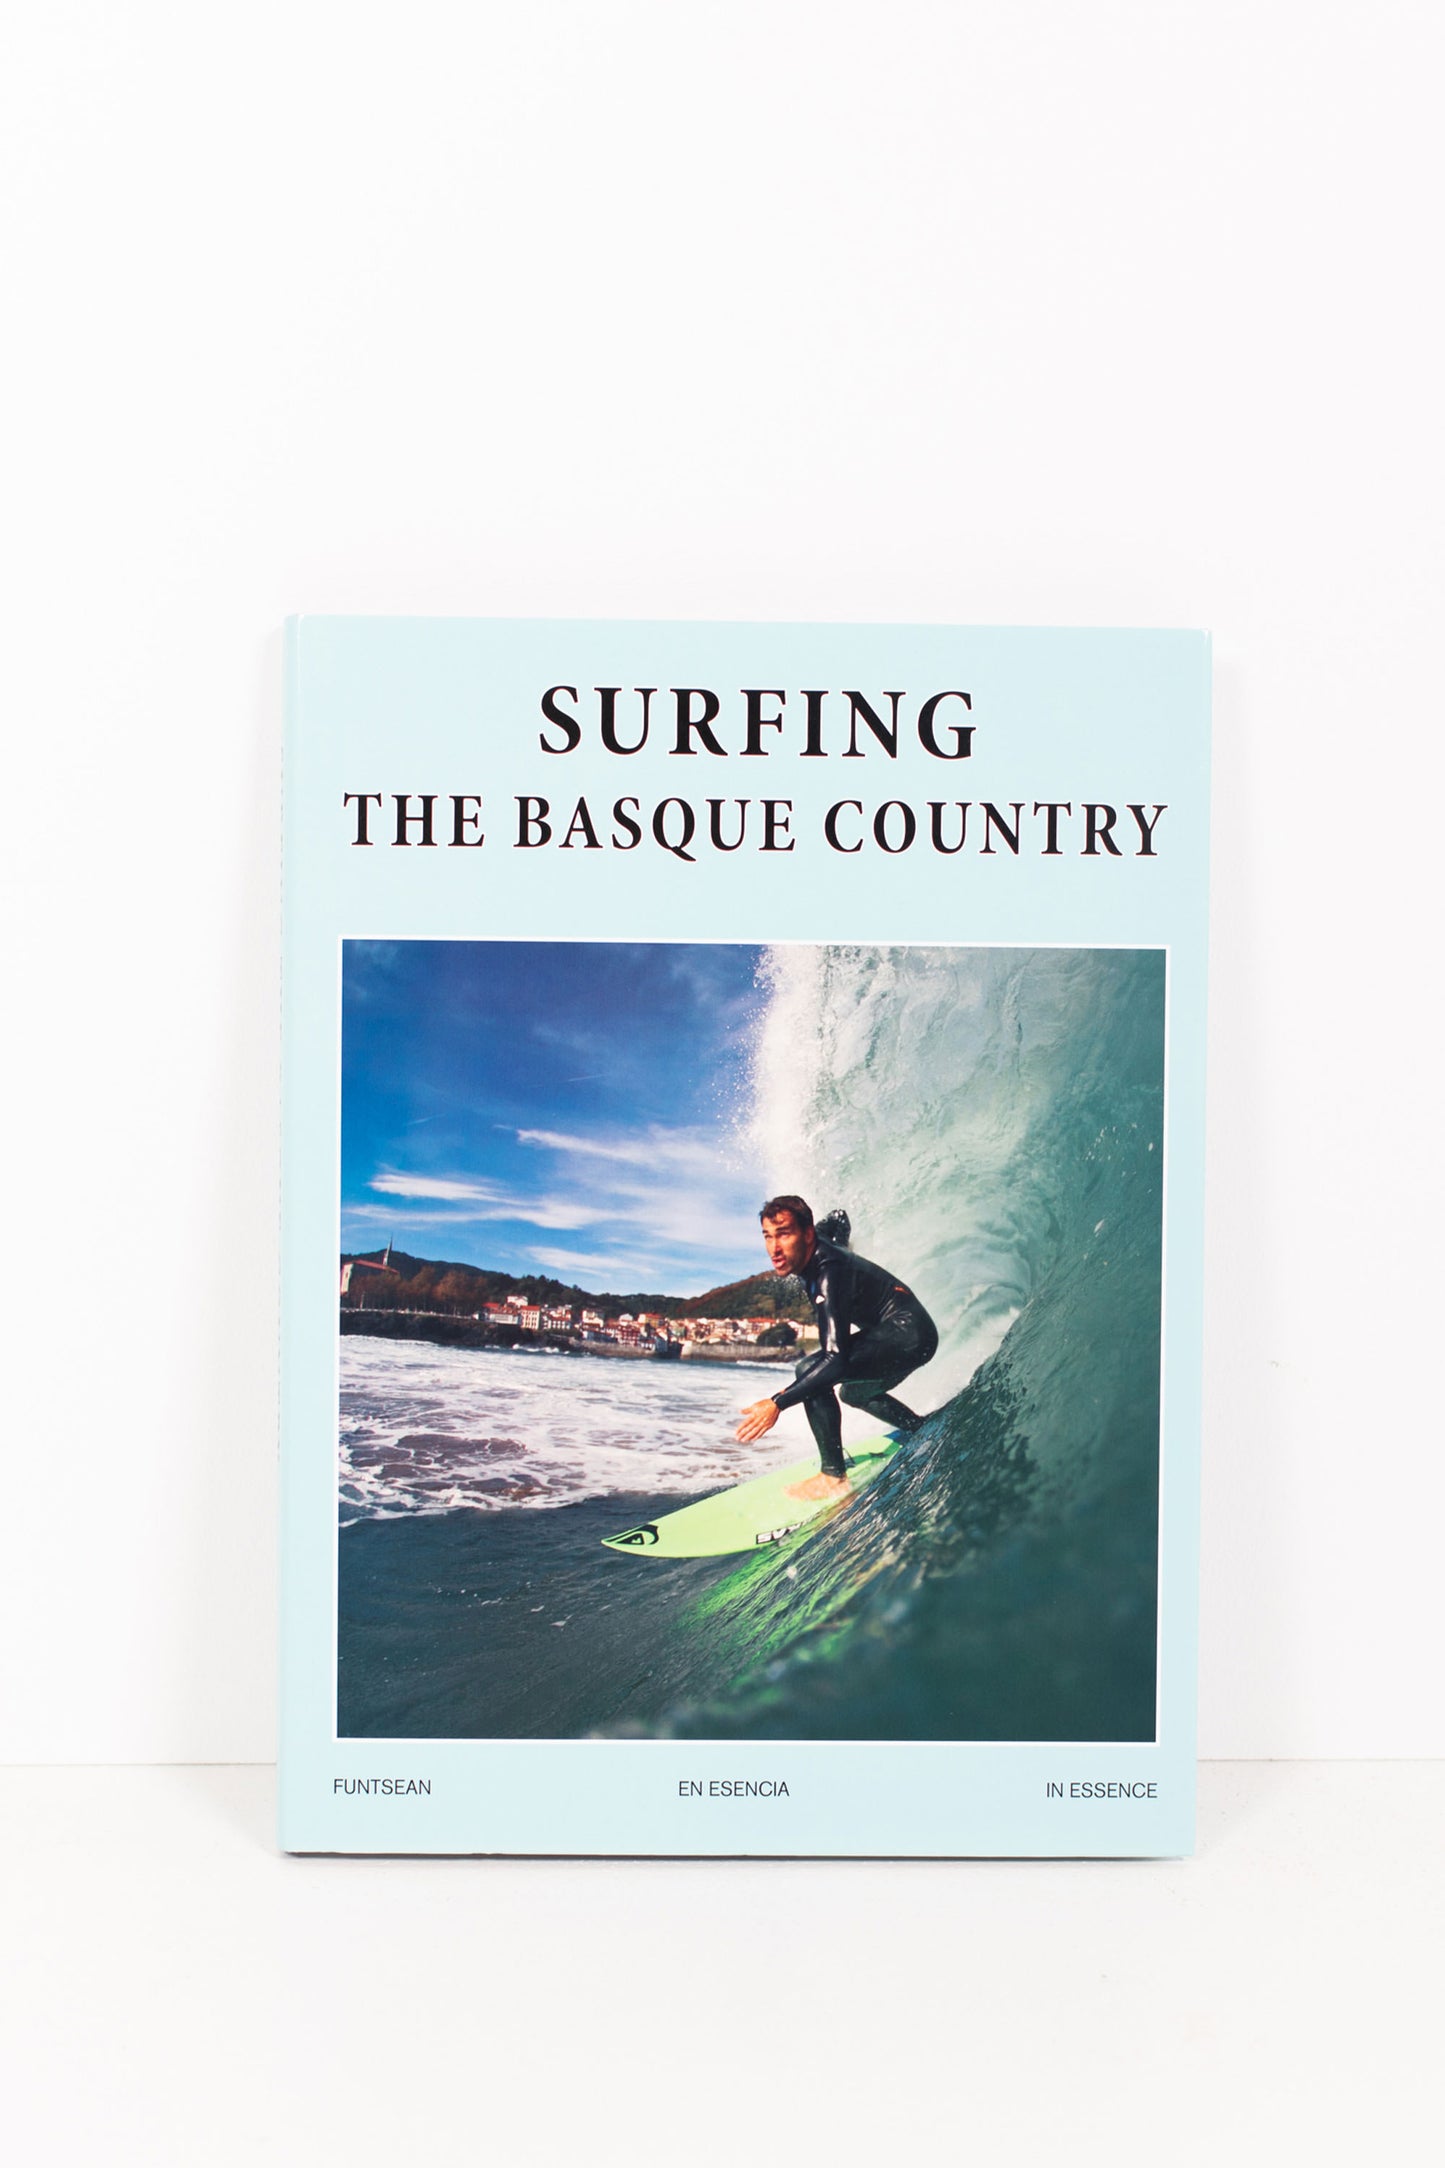 Pukas-Surf-Shop-book-surfing-the-basque-country